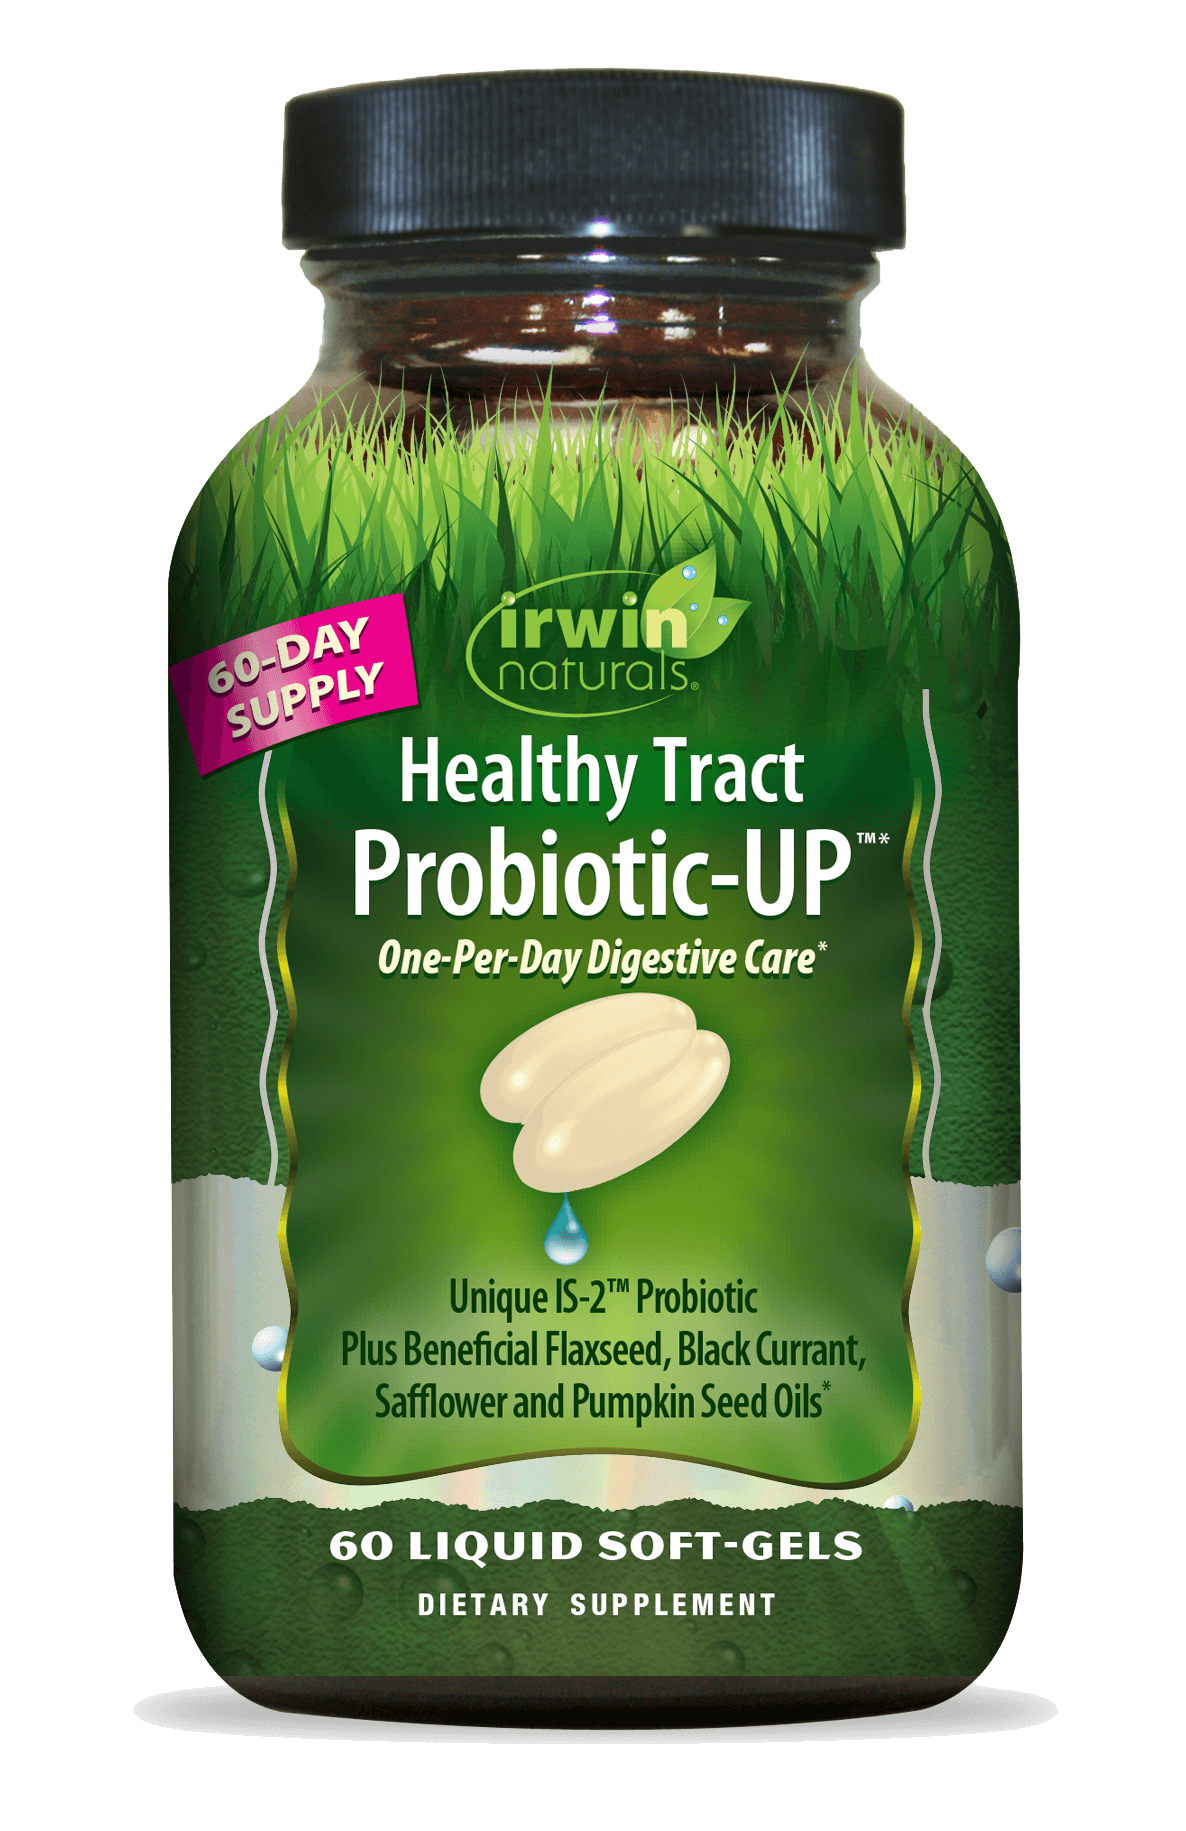 Healthy Tract Probiotic UP One Per Day Digestive Care by Irwin Naturals